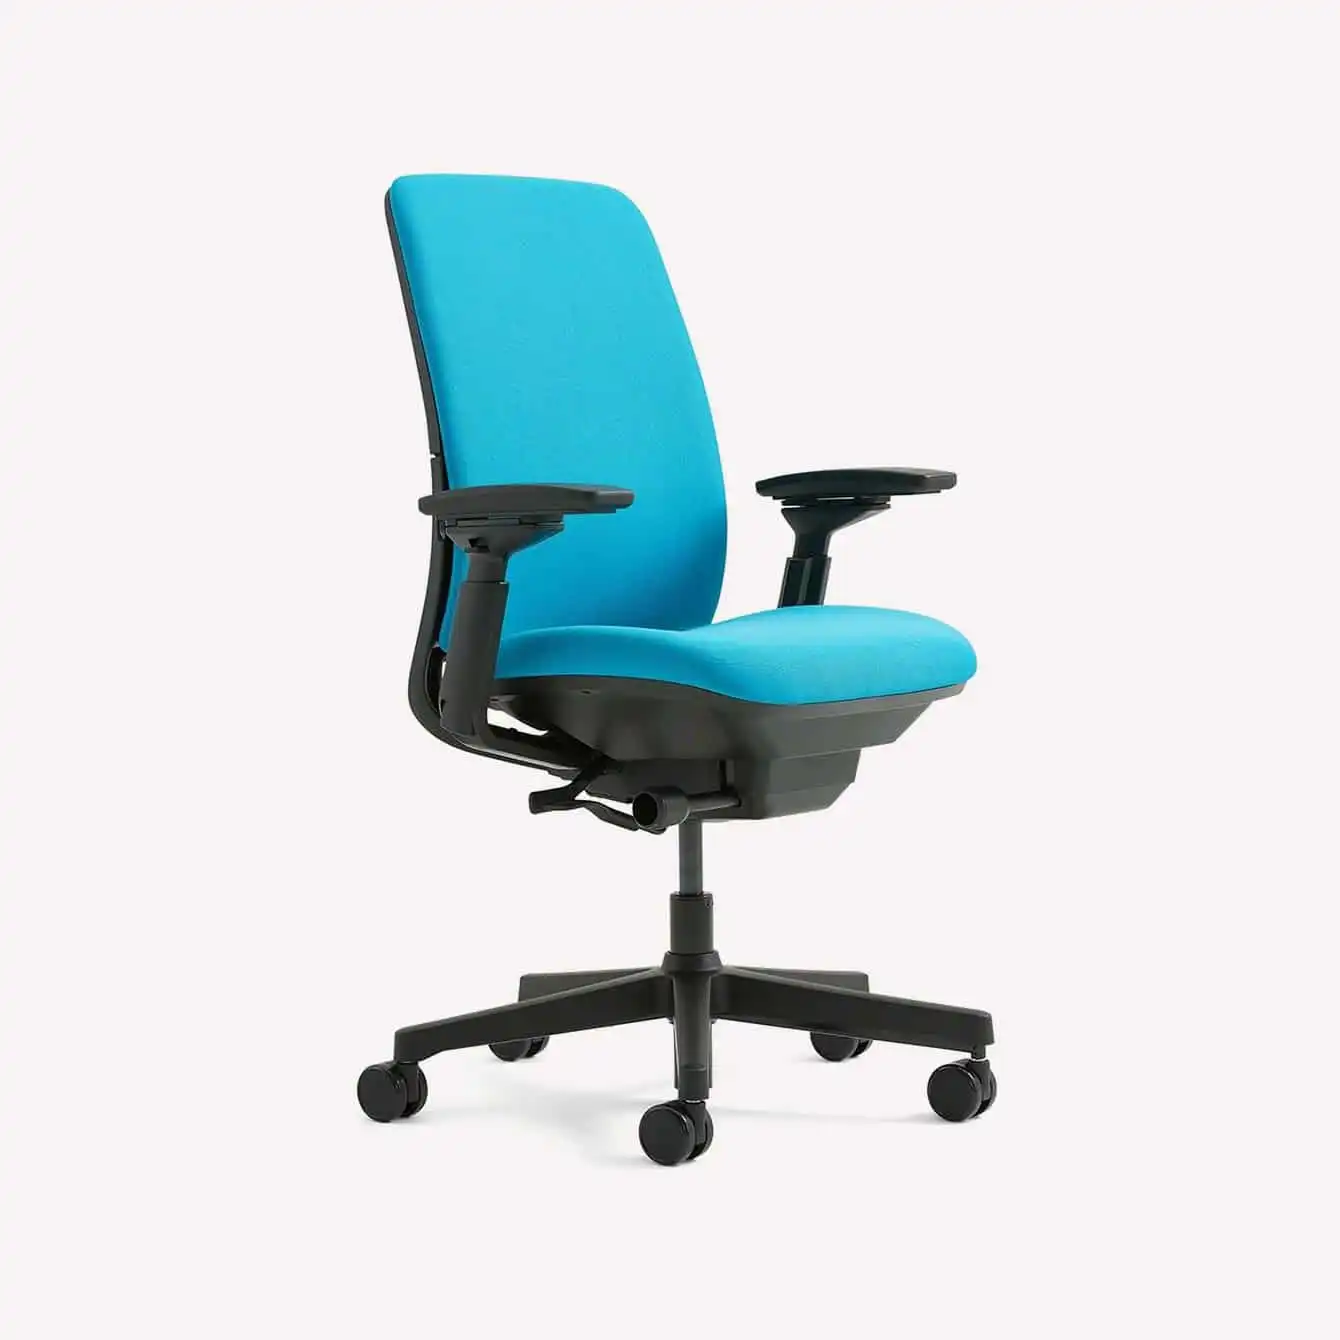 Find the best office chairs for short adults that have an